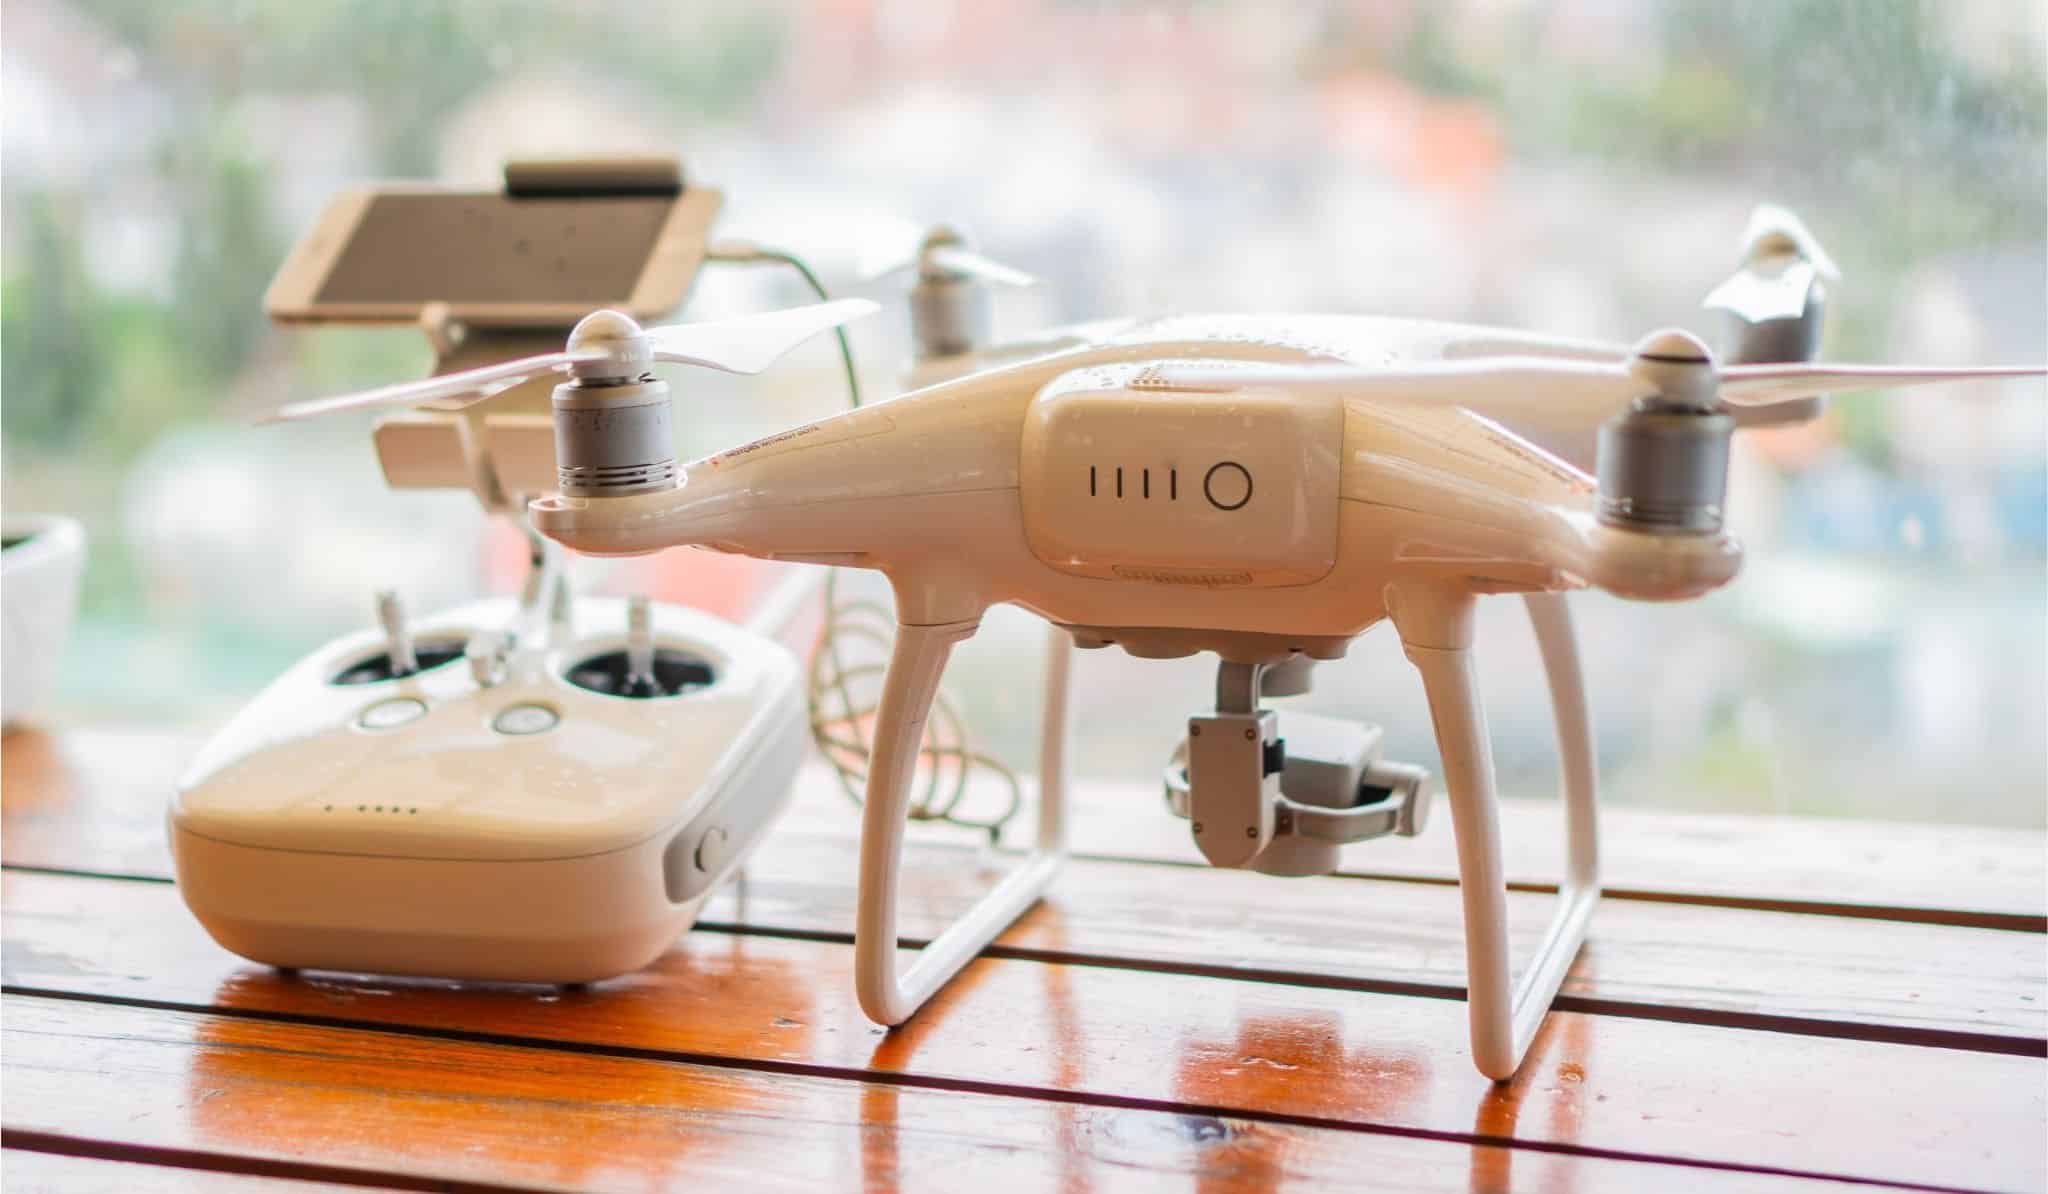 Drone and controller on top of a wooden table